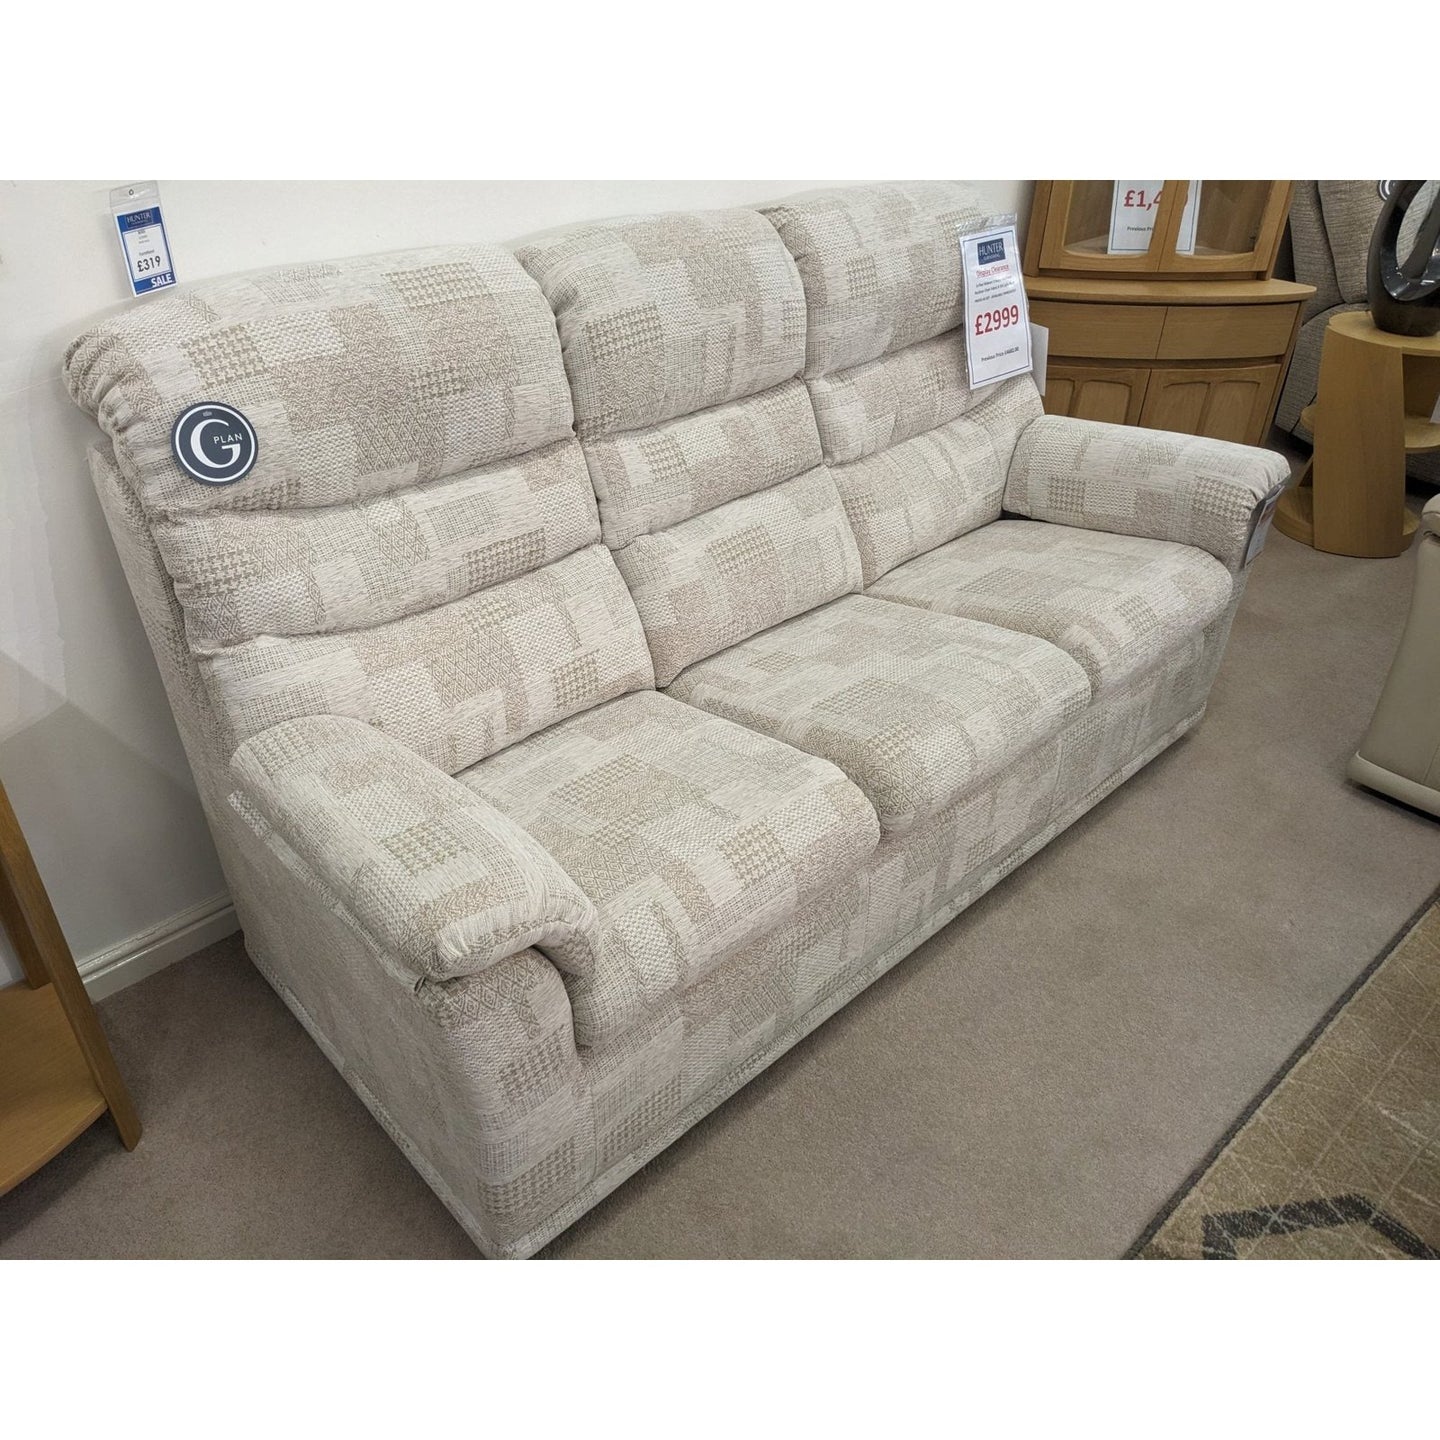 G-Plan Malvern 3 Seater Sofa and Power Armchair in Fabric Lydia Blush